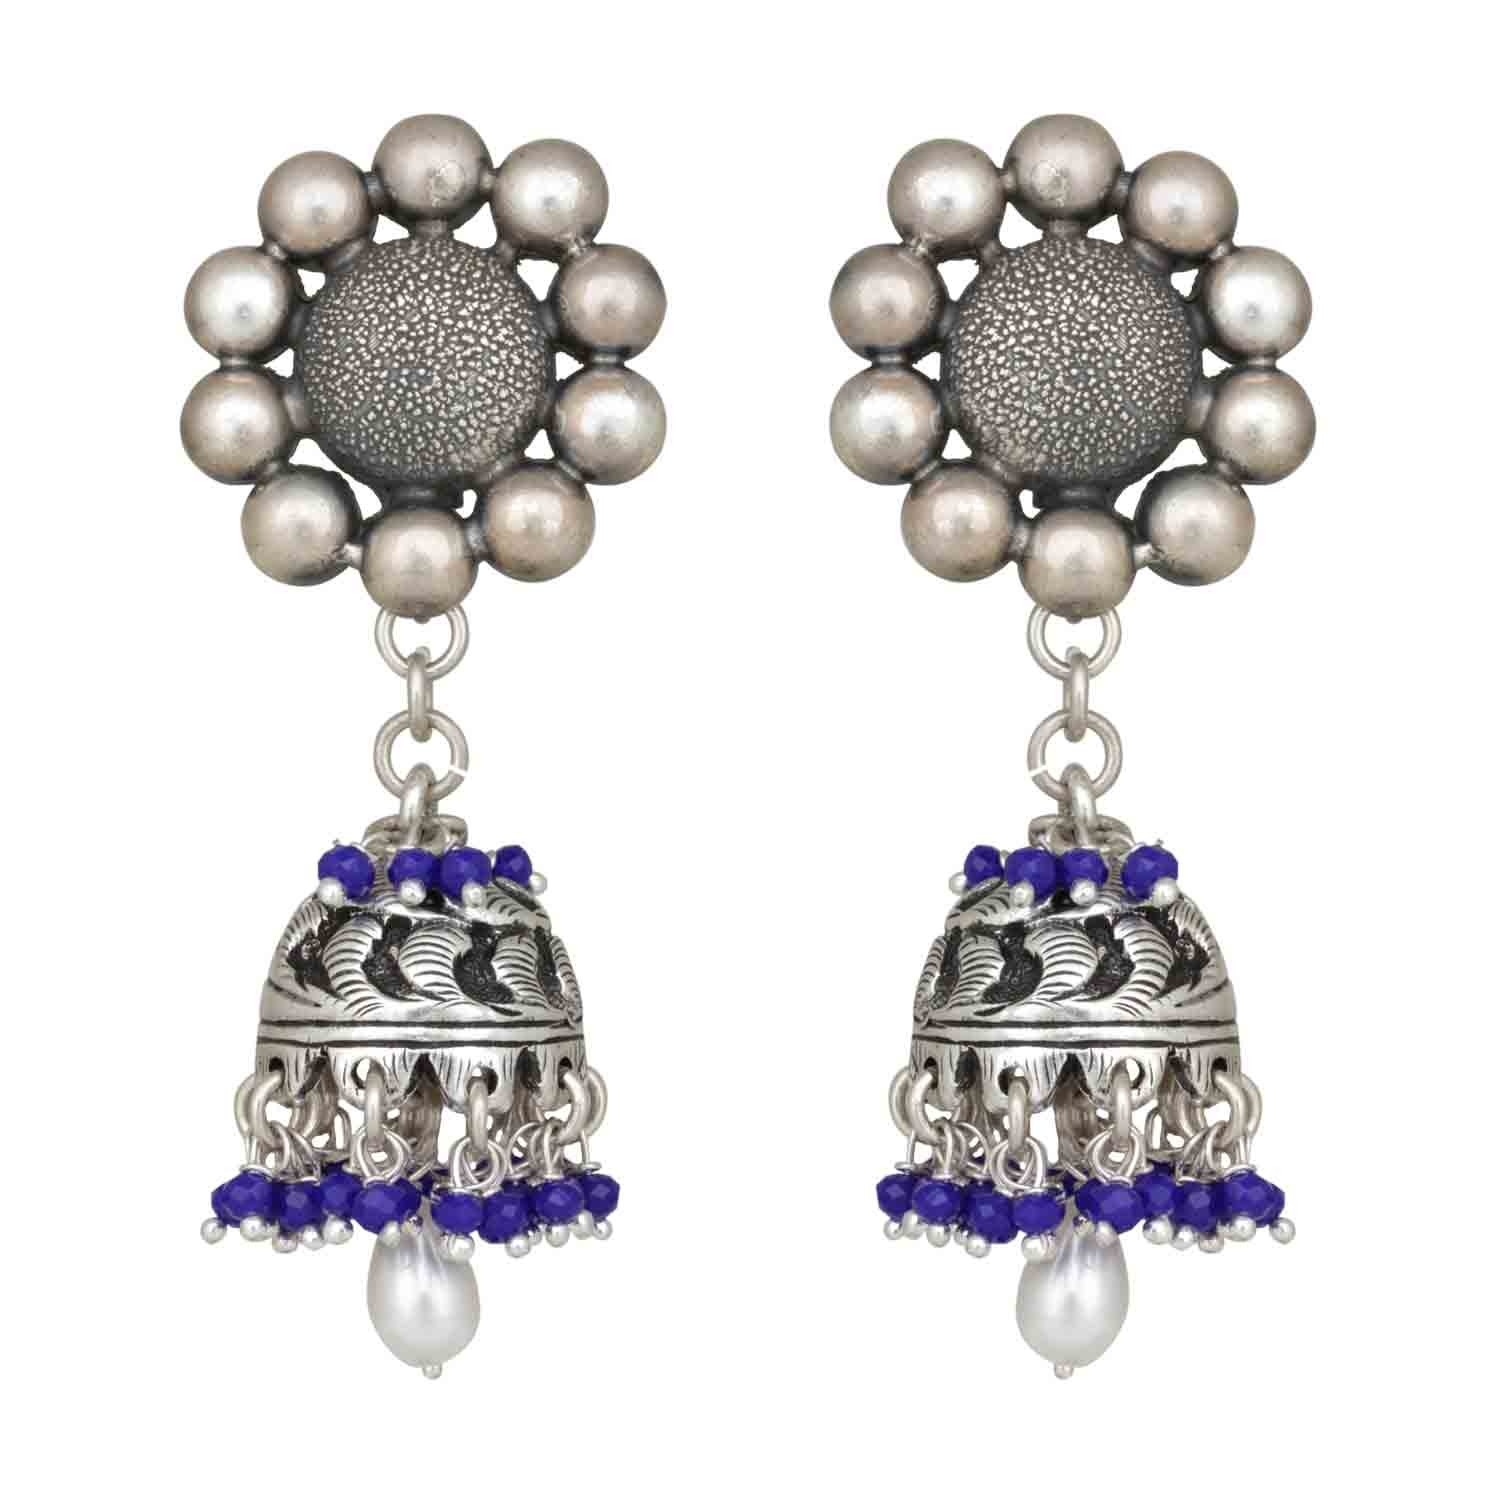 Onyx Pearl Silver Jhumka Earrings for Women and Girls